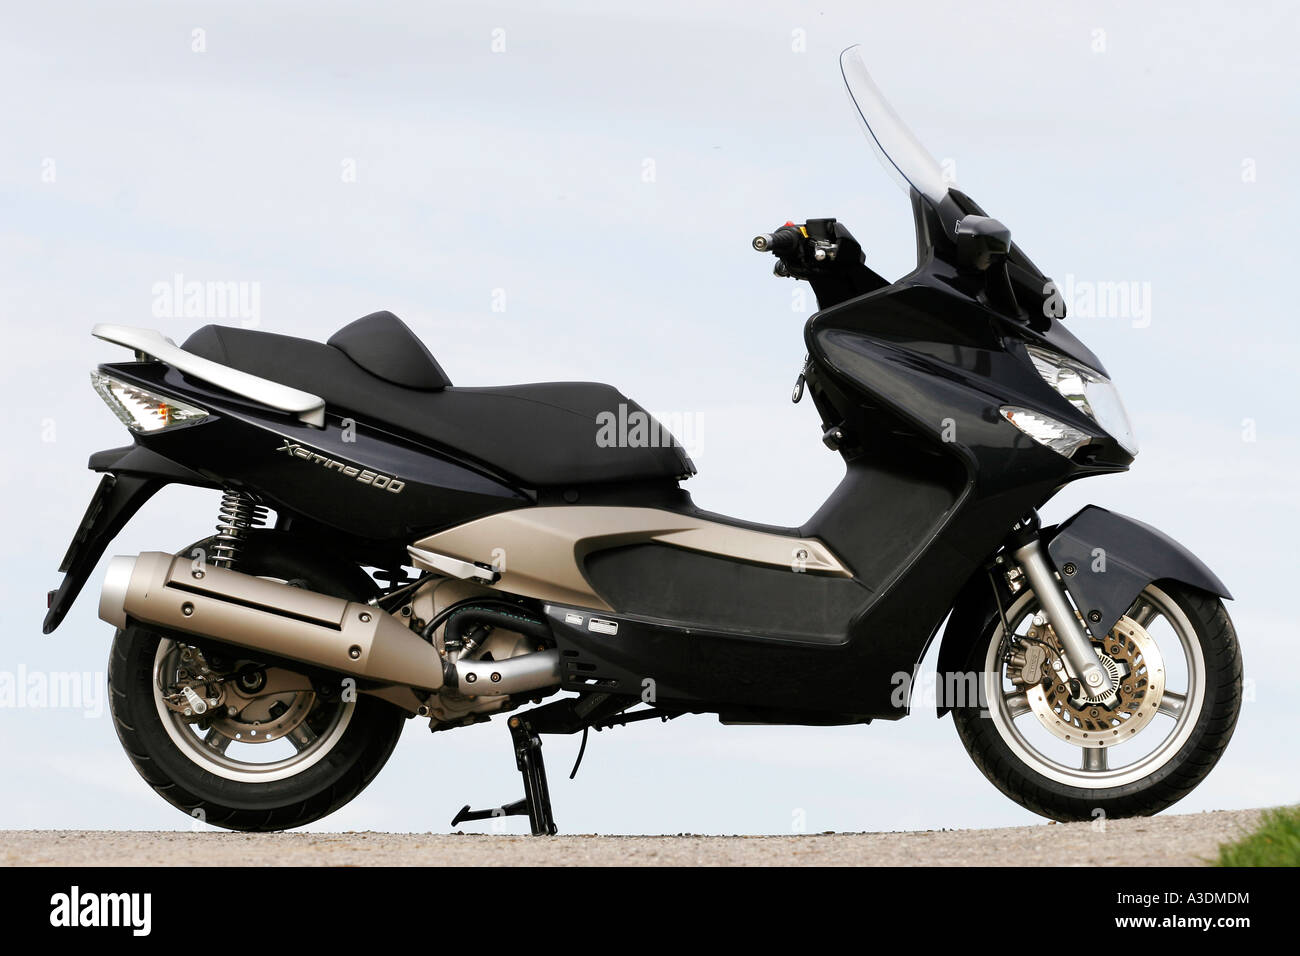 Kymco Xciting 500 scooter Stock Photo - Alamy